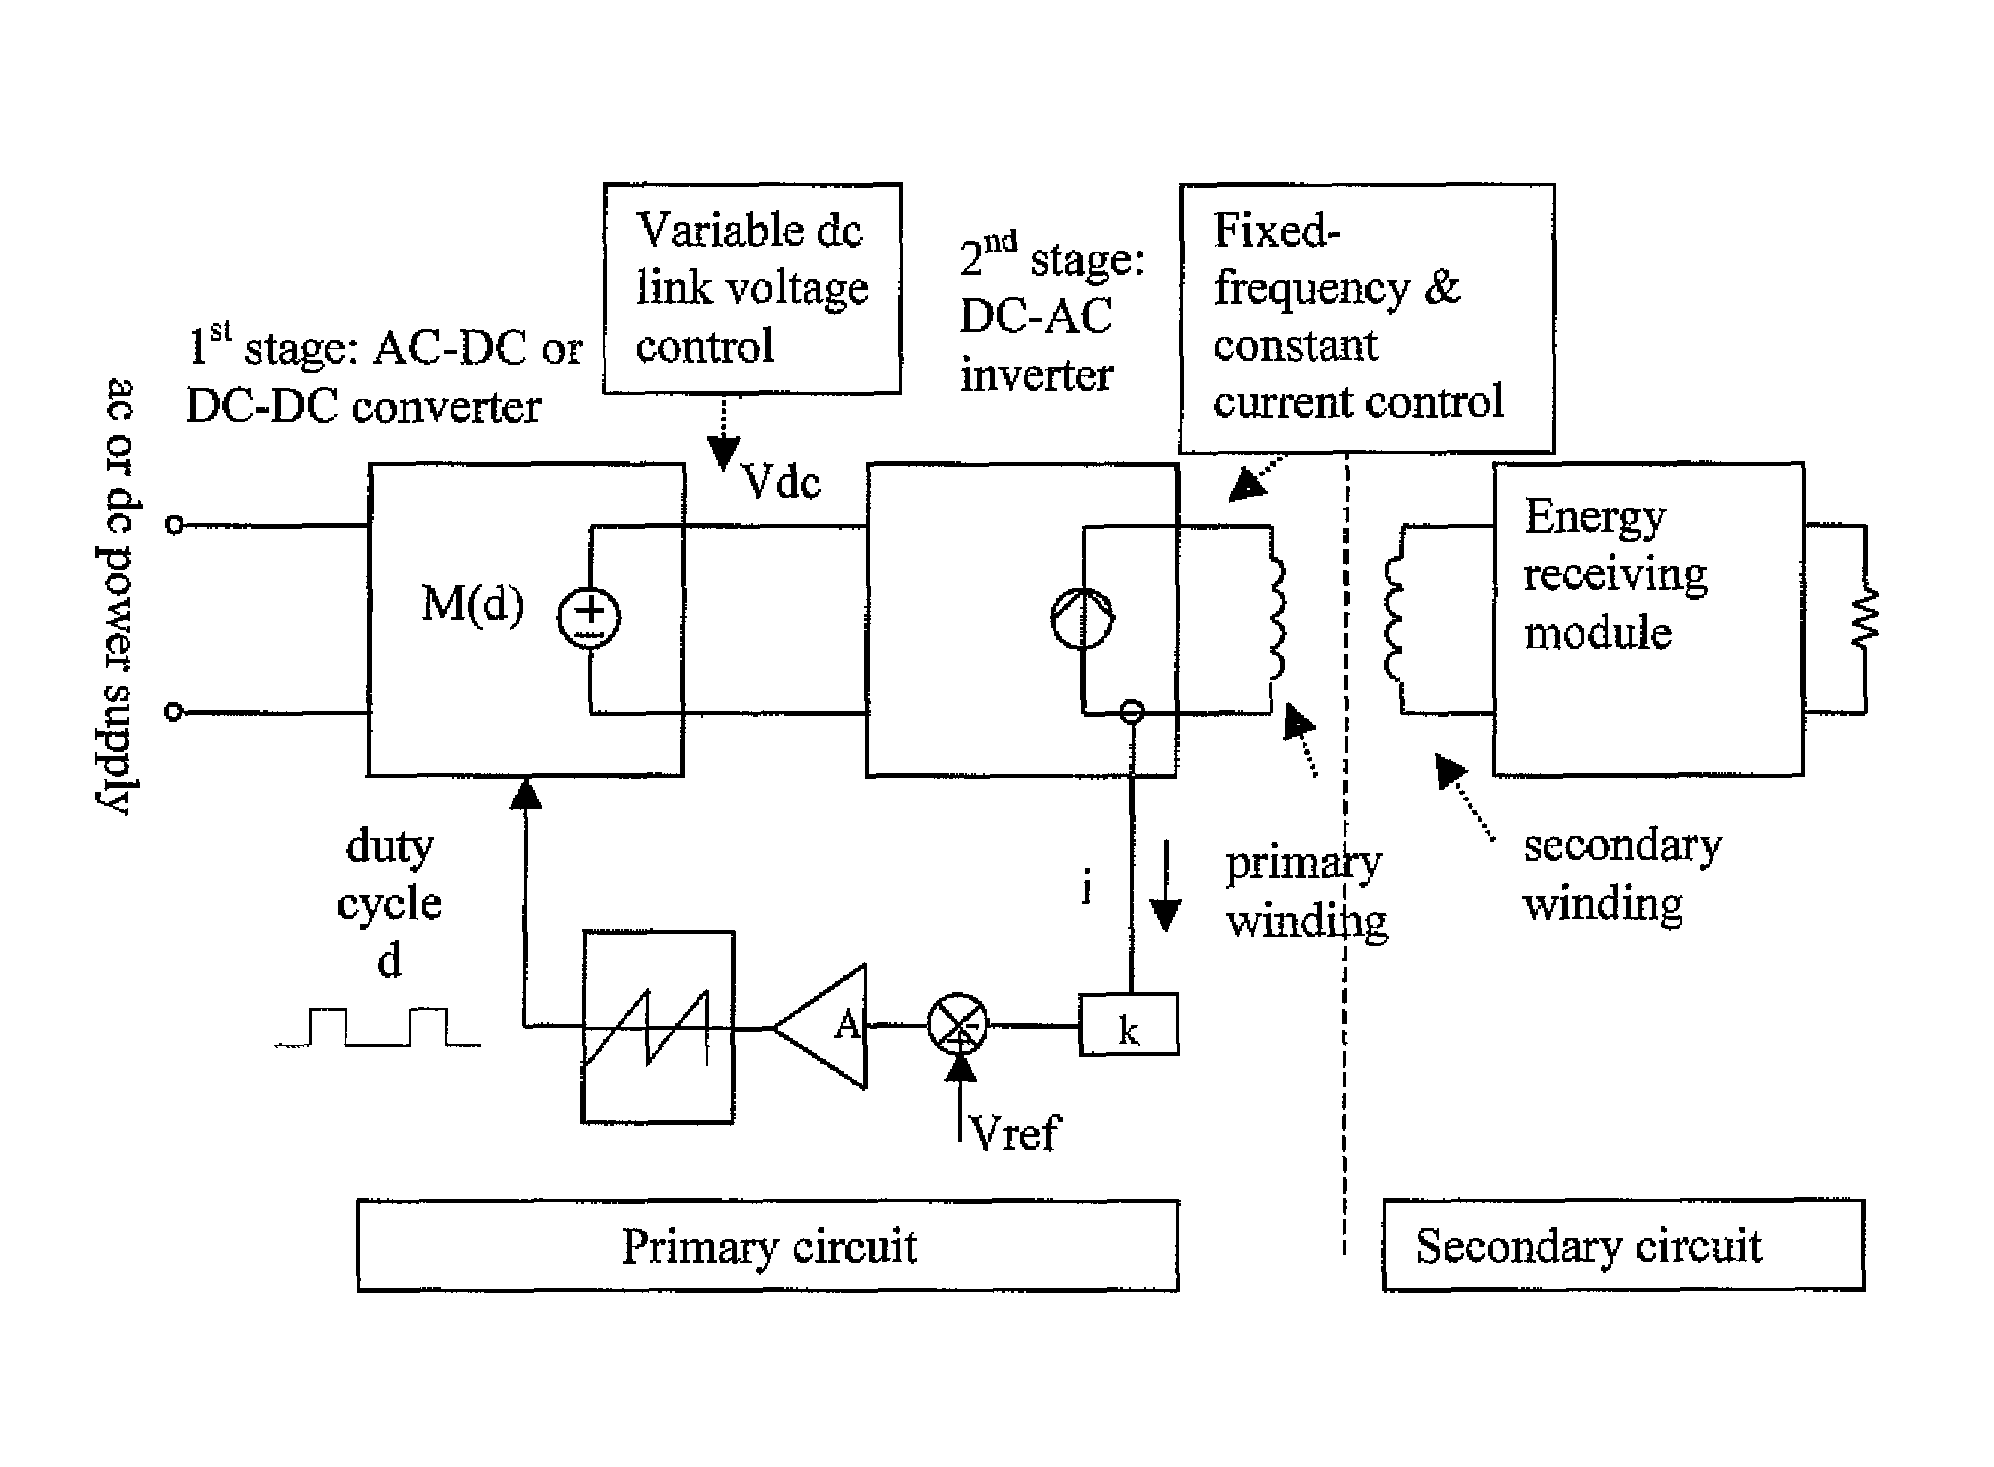 Electronic control method for a planar inductive battery charging apparatus